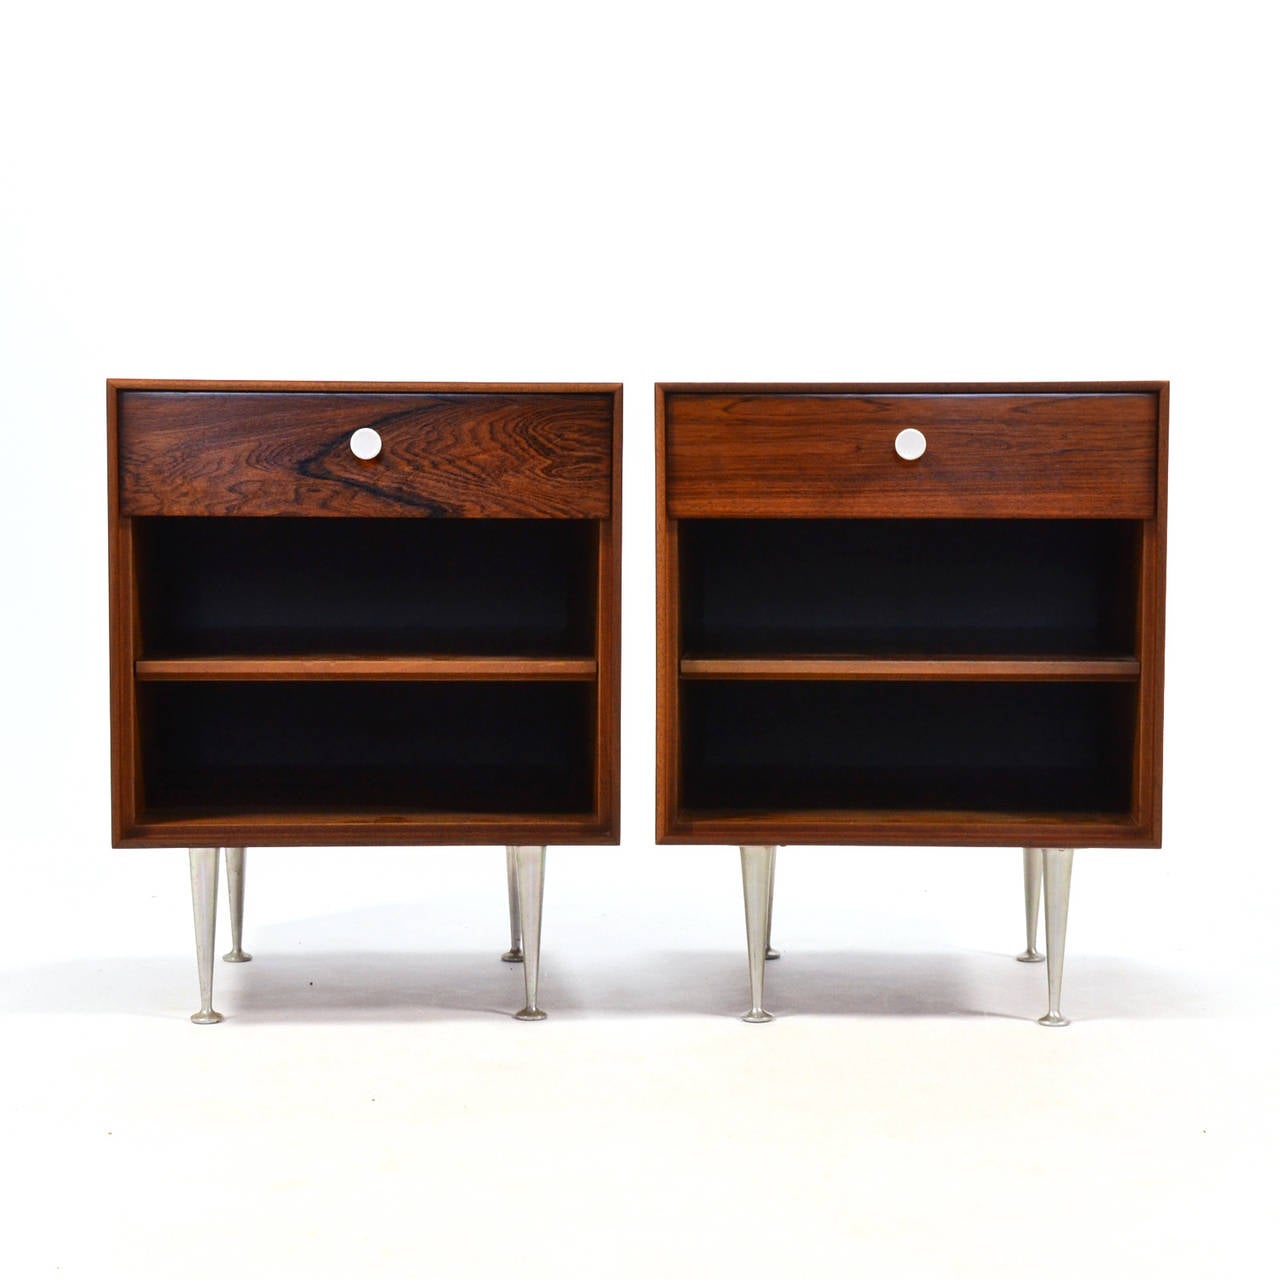 An exceptional pair of nightstands from Nelson's thin-edge rosewood group for Herman Miller, these lovely pieces are clad is highly figured rich rosewood. They feature the Classic white hourglass-shaped pulls and turned aluminum legs. 

Nelson